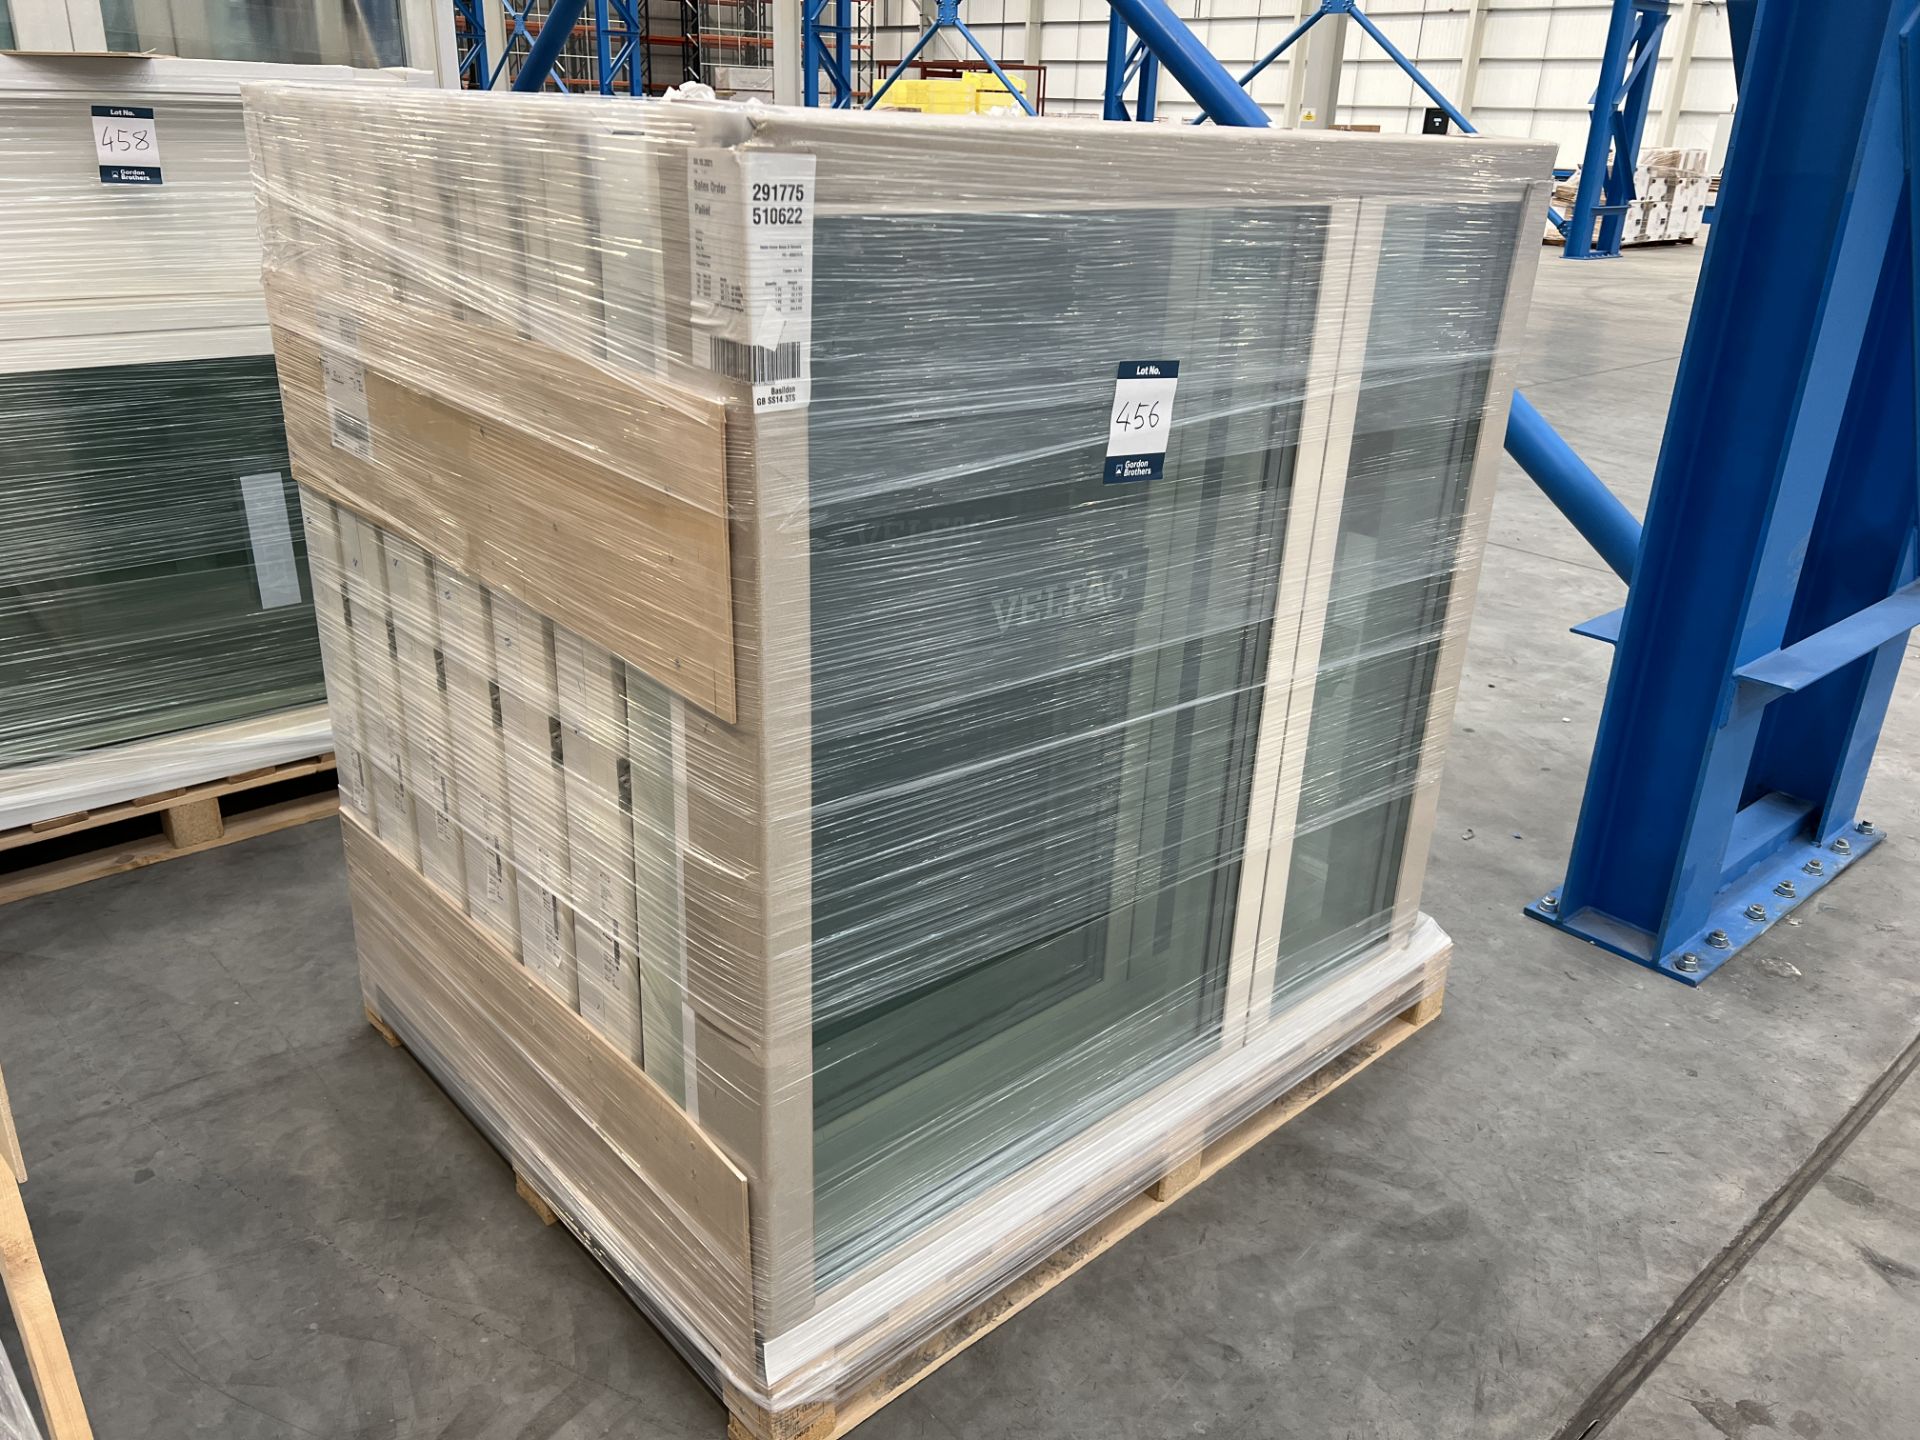 Qty 7 Velfac double glassed window units, size 1340mm (W) x 1297mm (H) as lotted (Unused) - Image 2 of 4